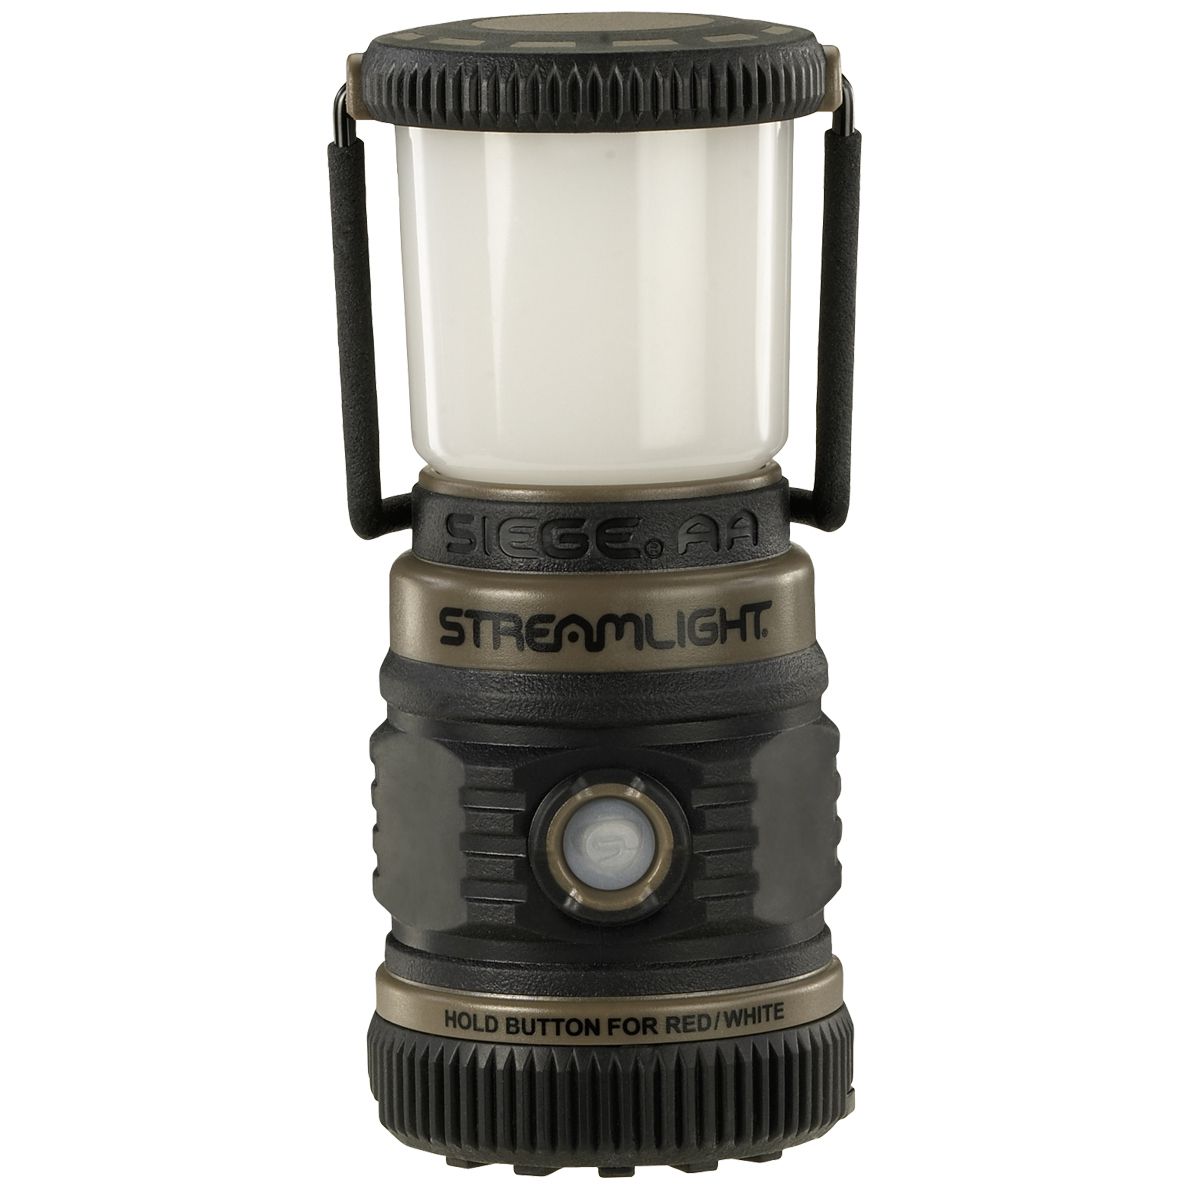 Streamlight Siege AA - Helle Camping-Laterne - LED-Leuchte mit Batterie